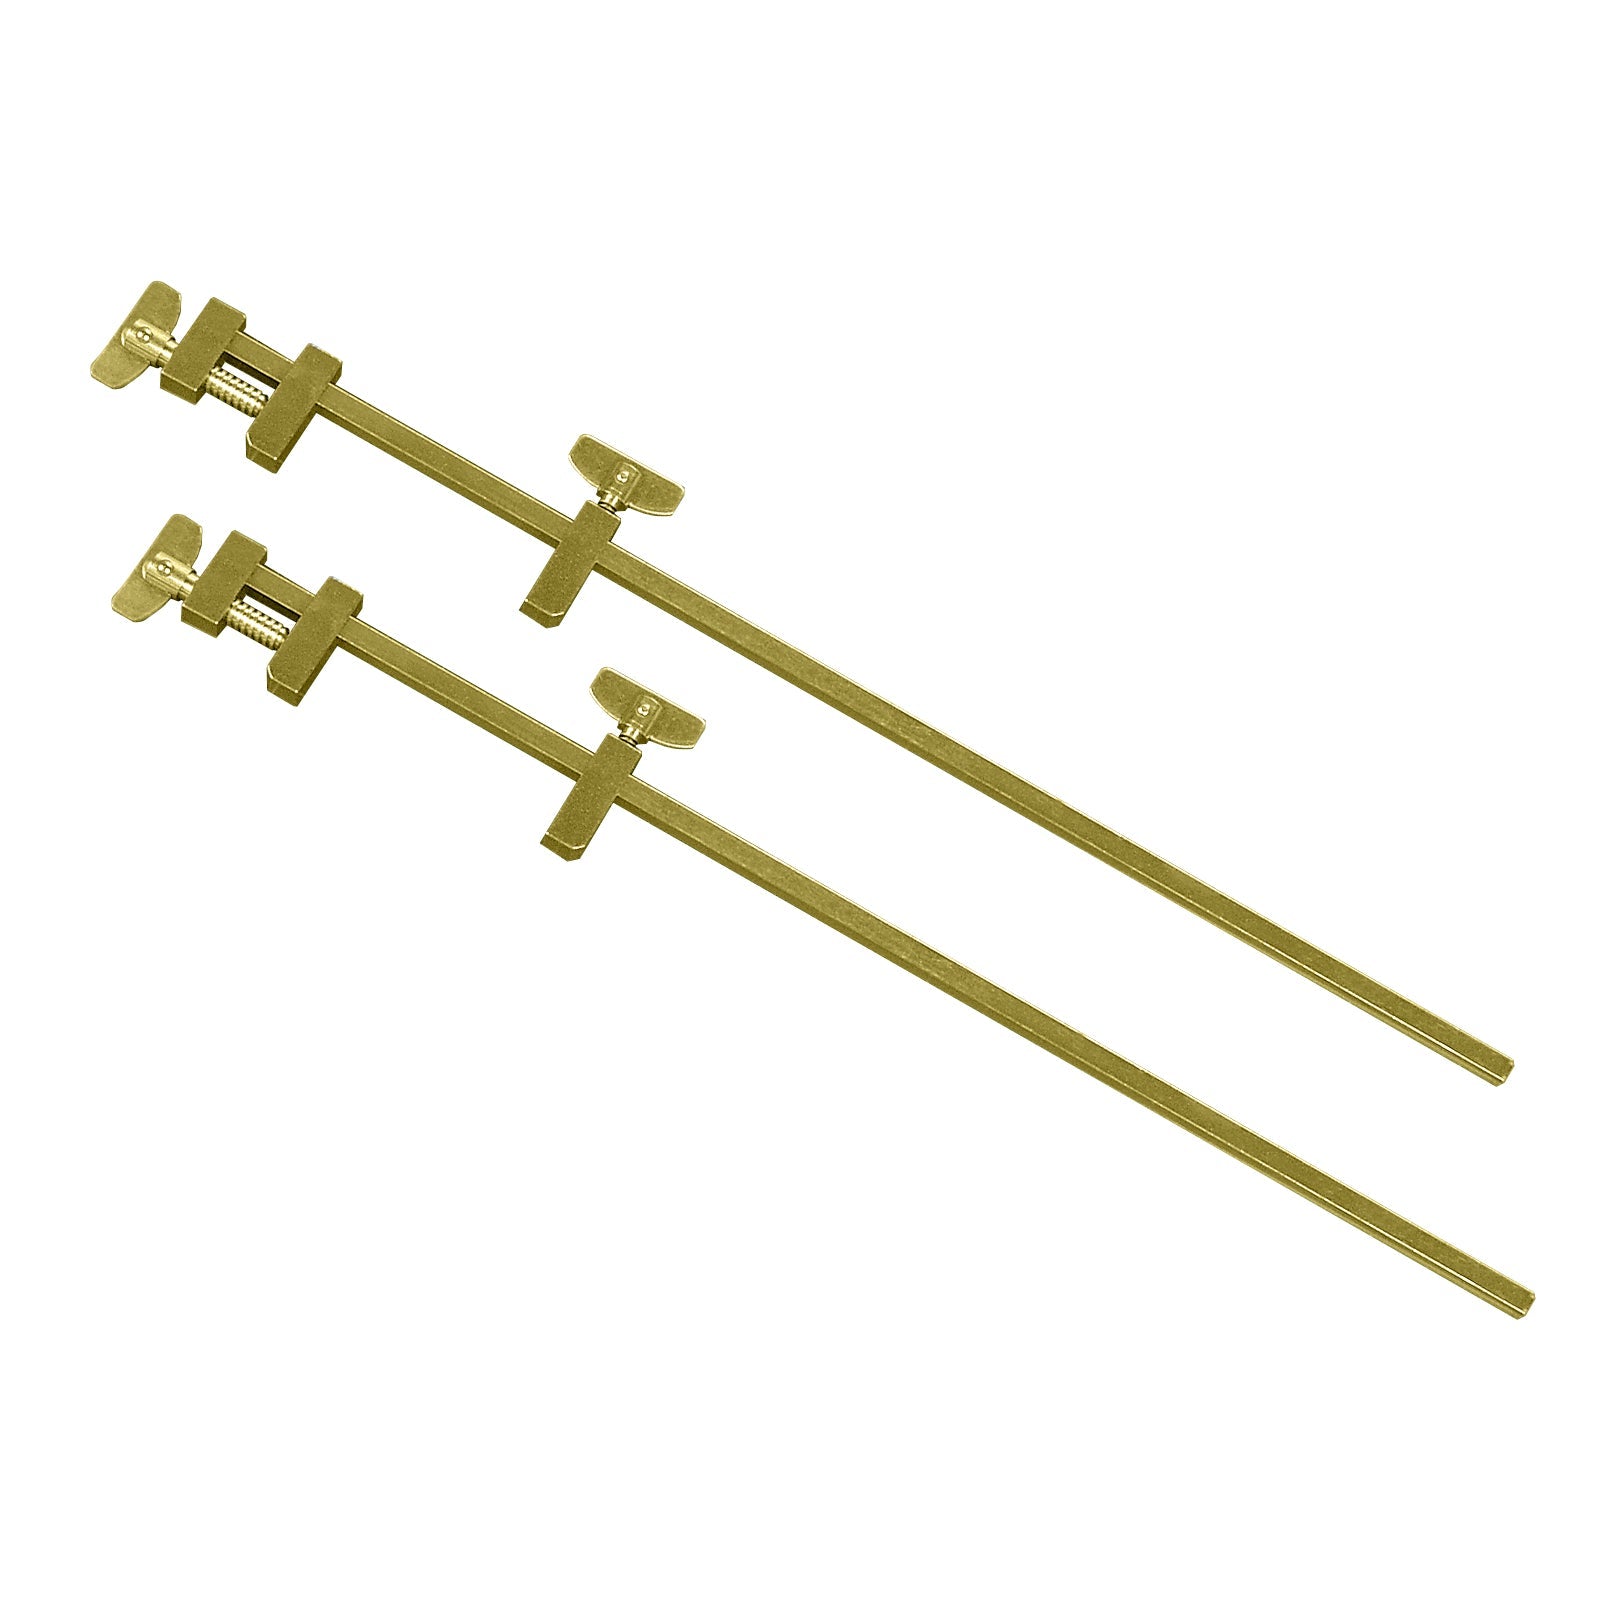 Solid Brass Miniature Bar Clamps, 12 Inches Long (Set of 2)